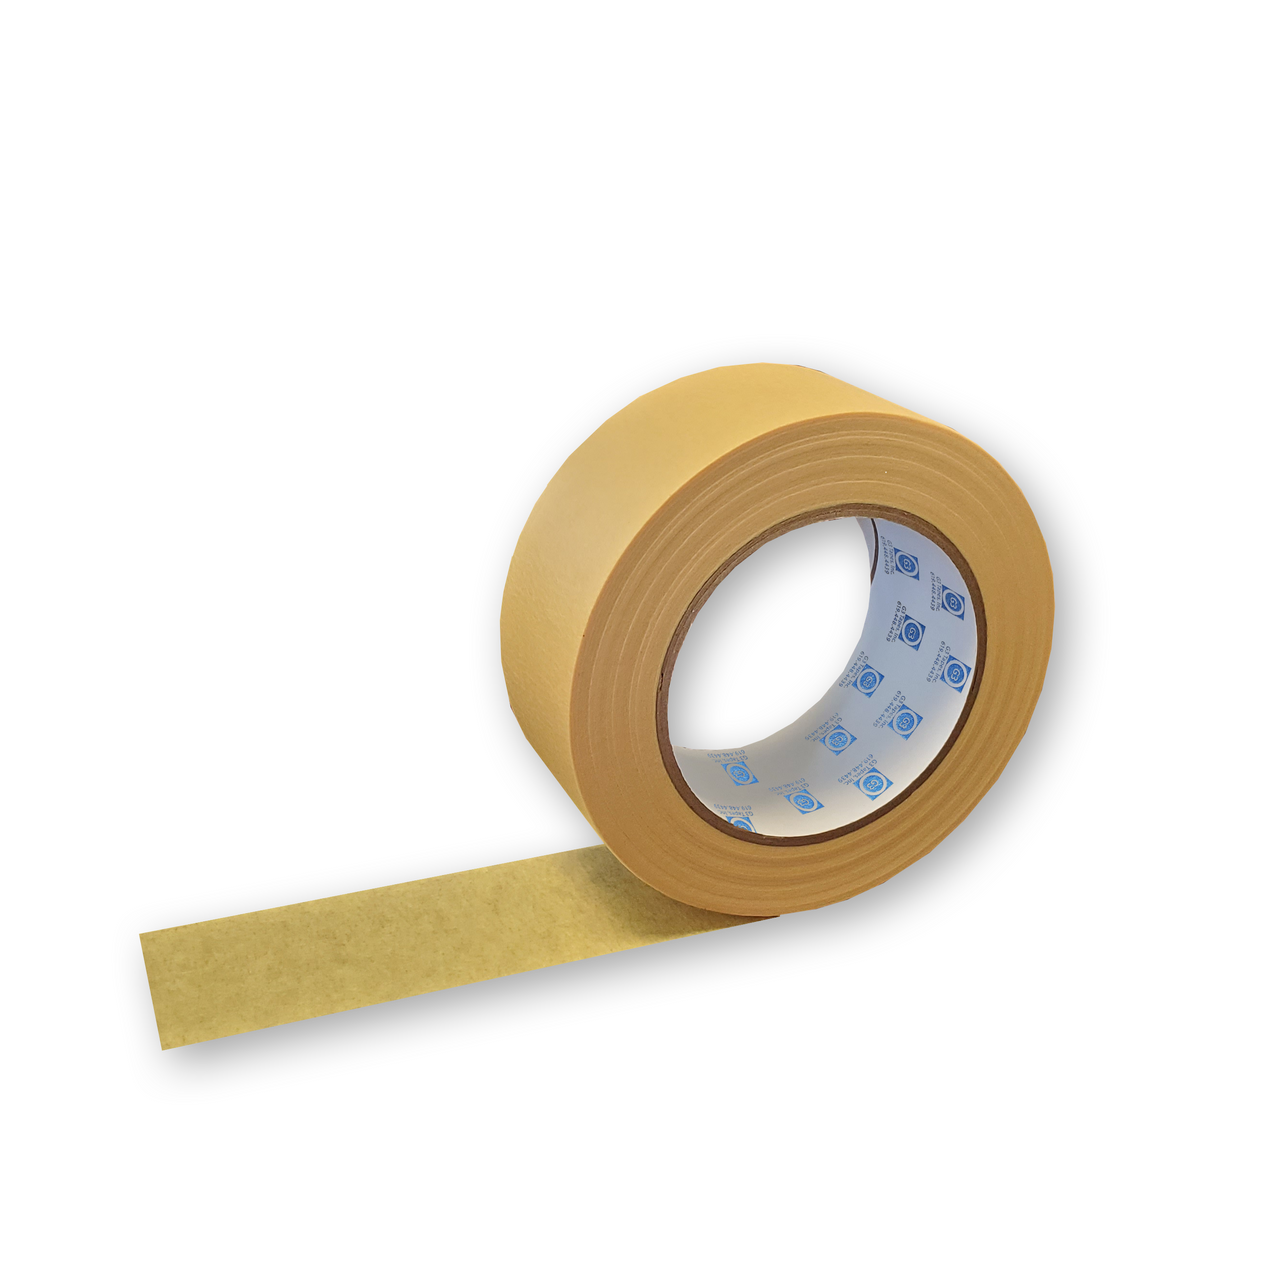 Natural Painters Grade Masking Tape 2"x55yds (24 Roll Case / $6.50 Per Roll)